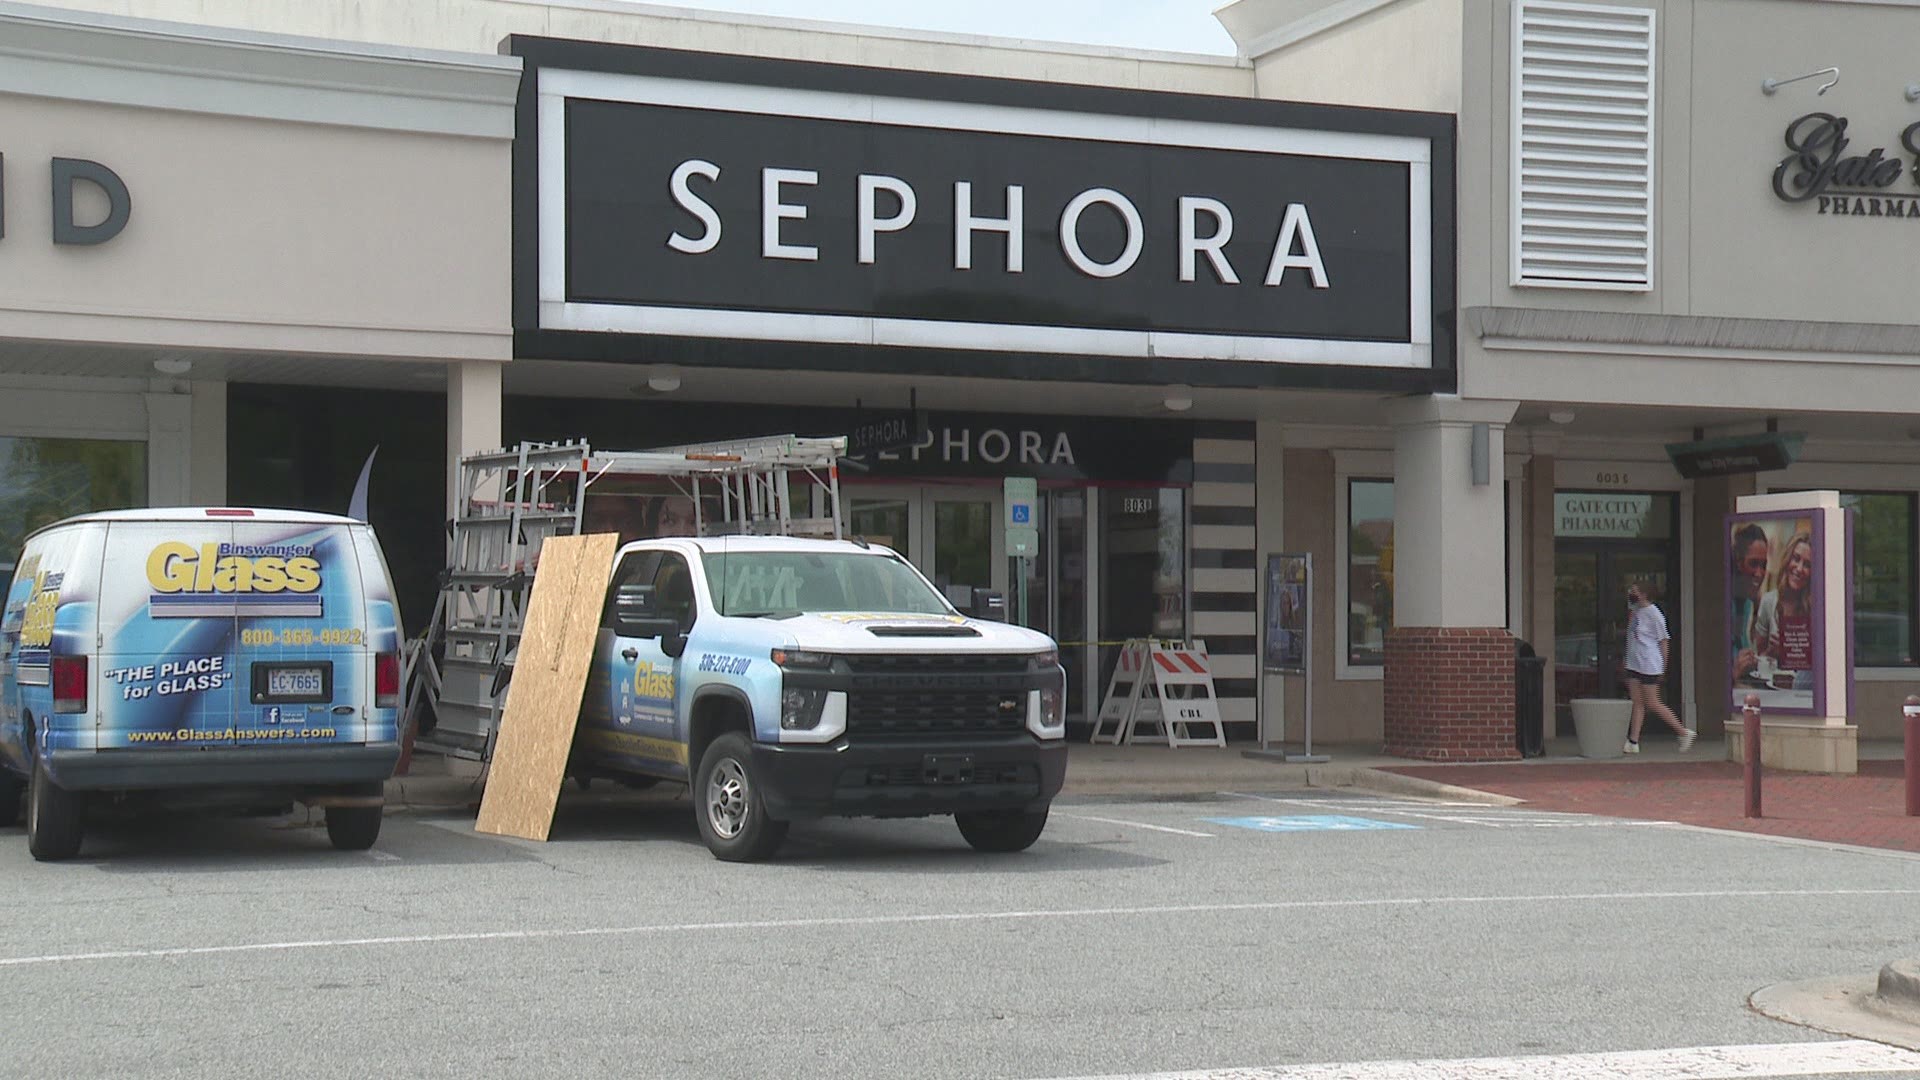 A driver crashed into the Sephora store in Greensboro at the Friendly Center.